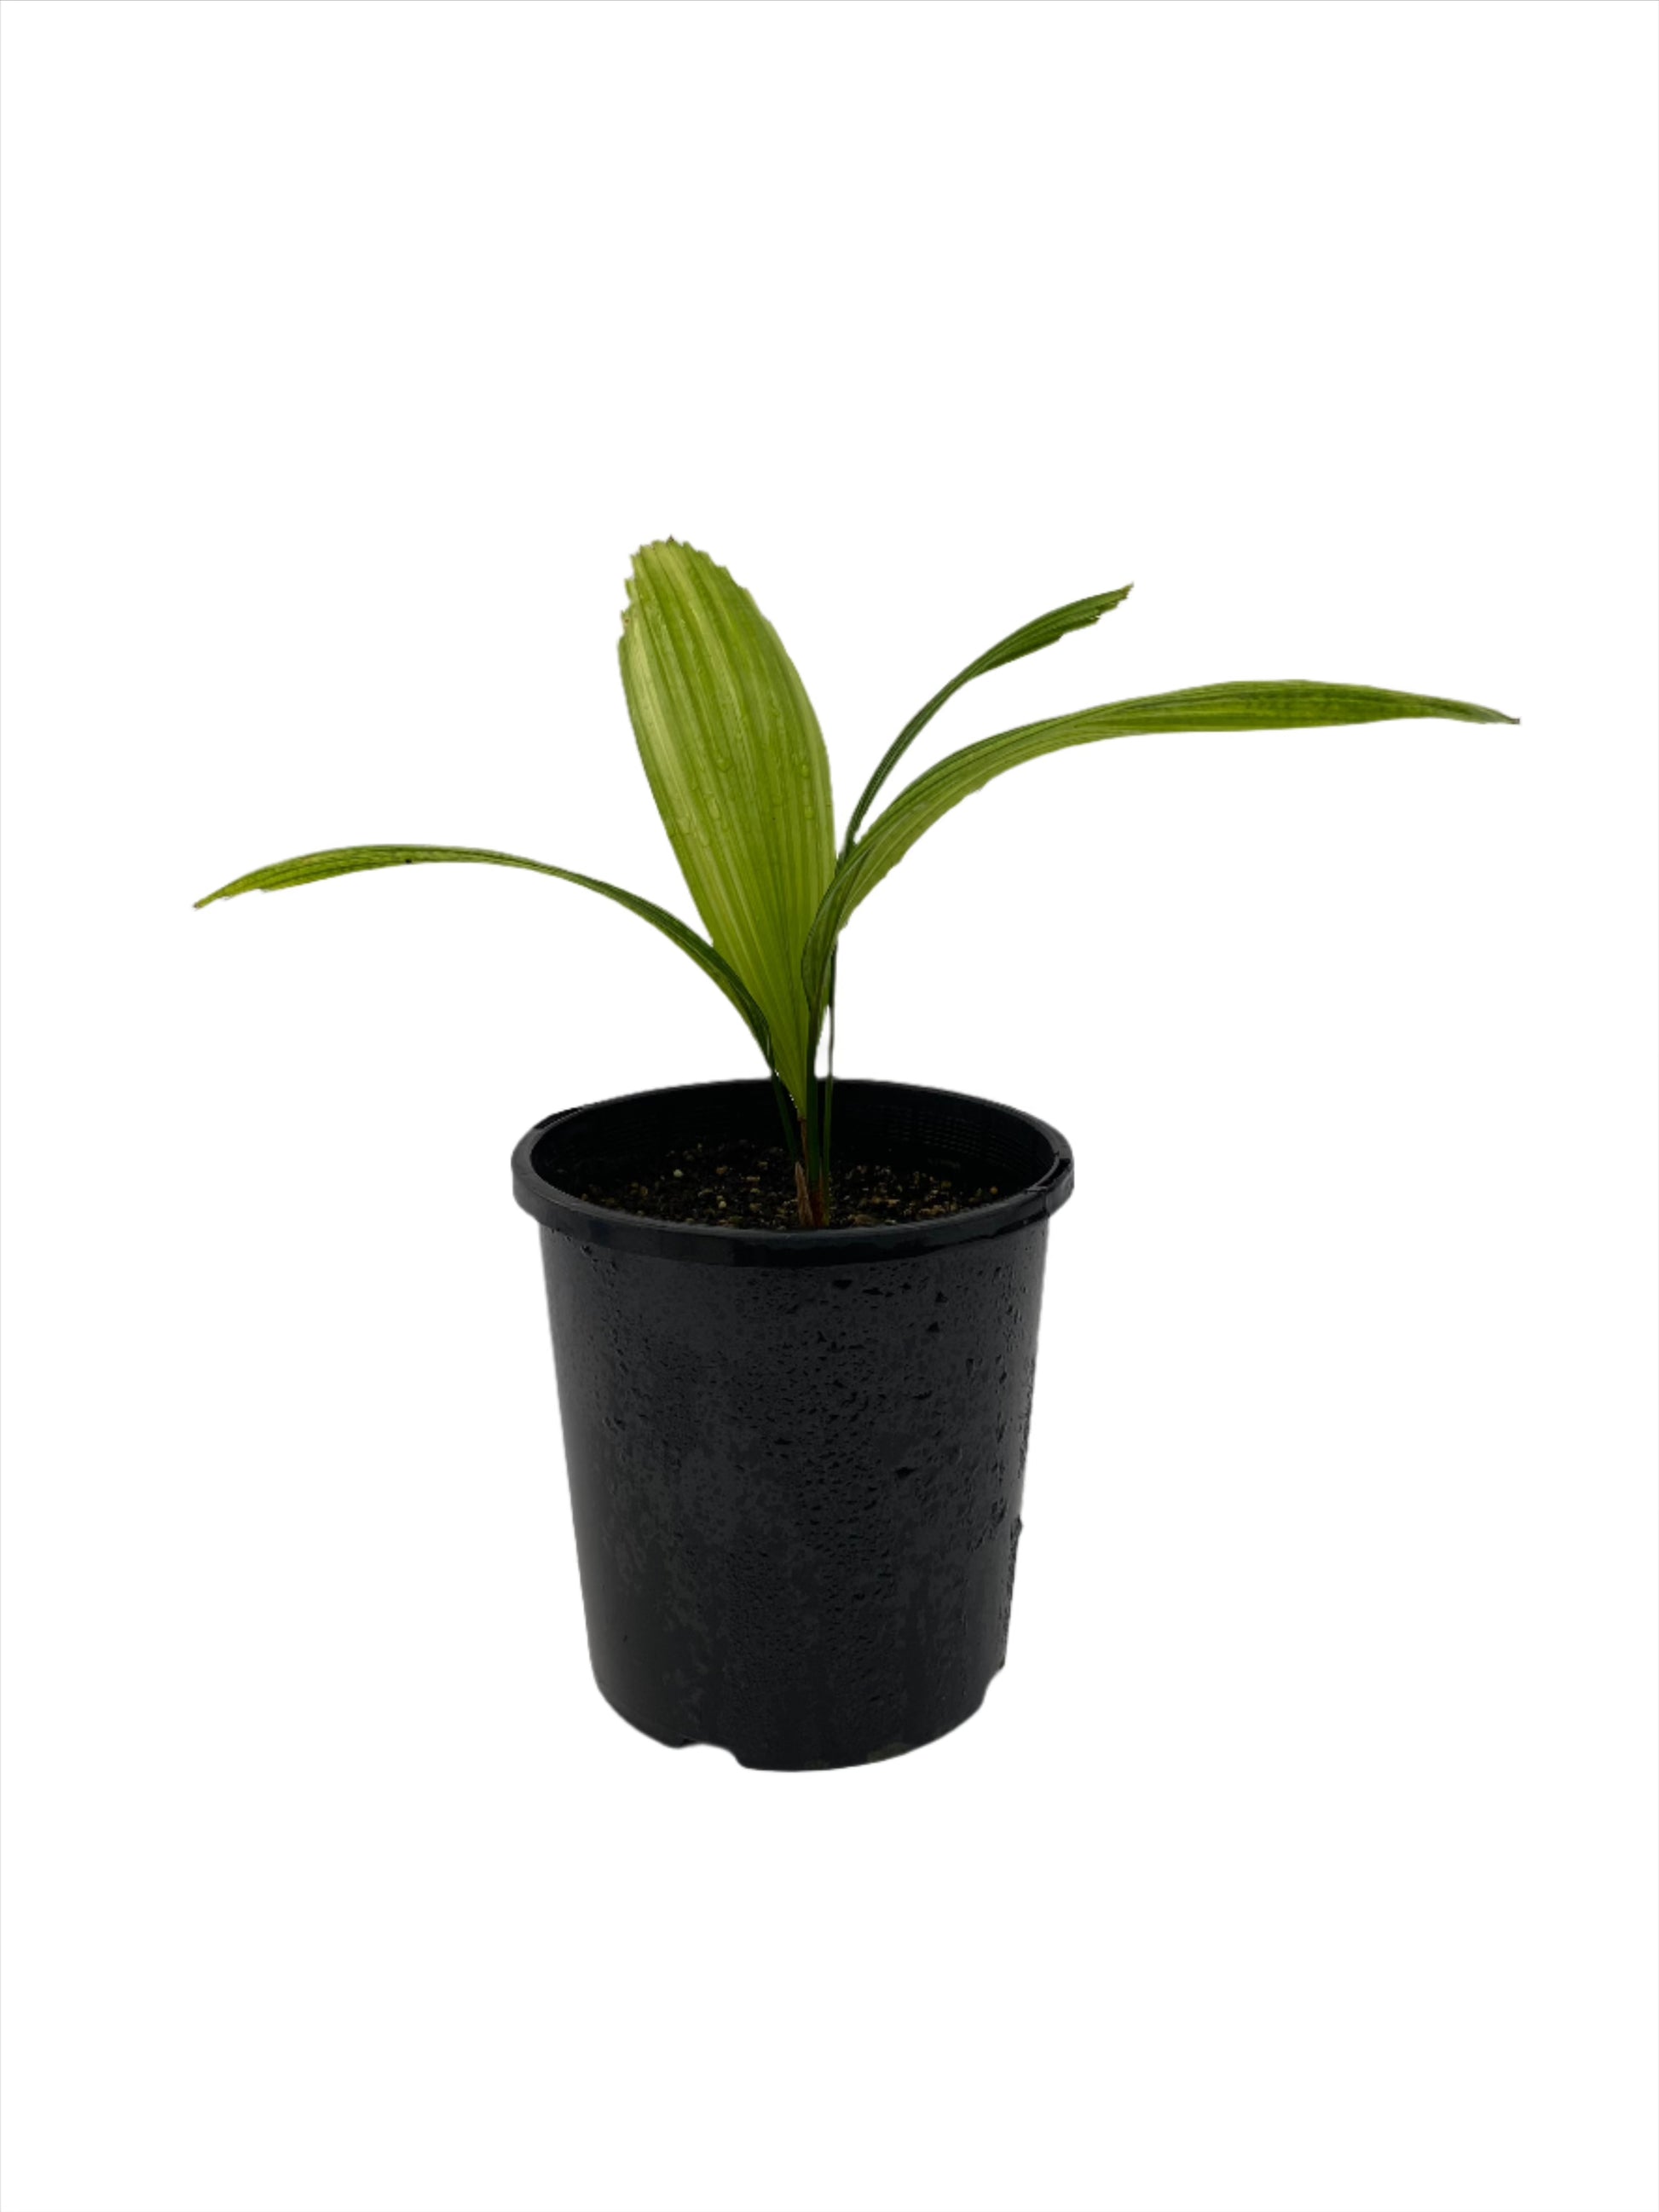 Young potted Licuala grandis seedling